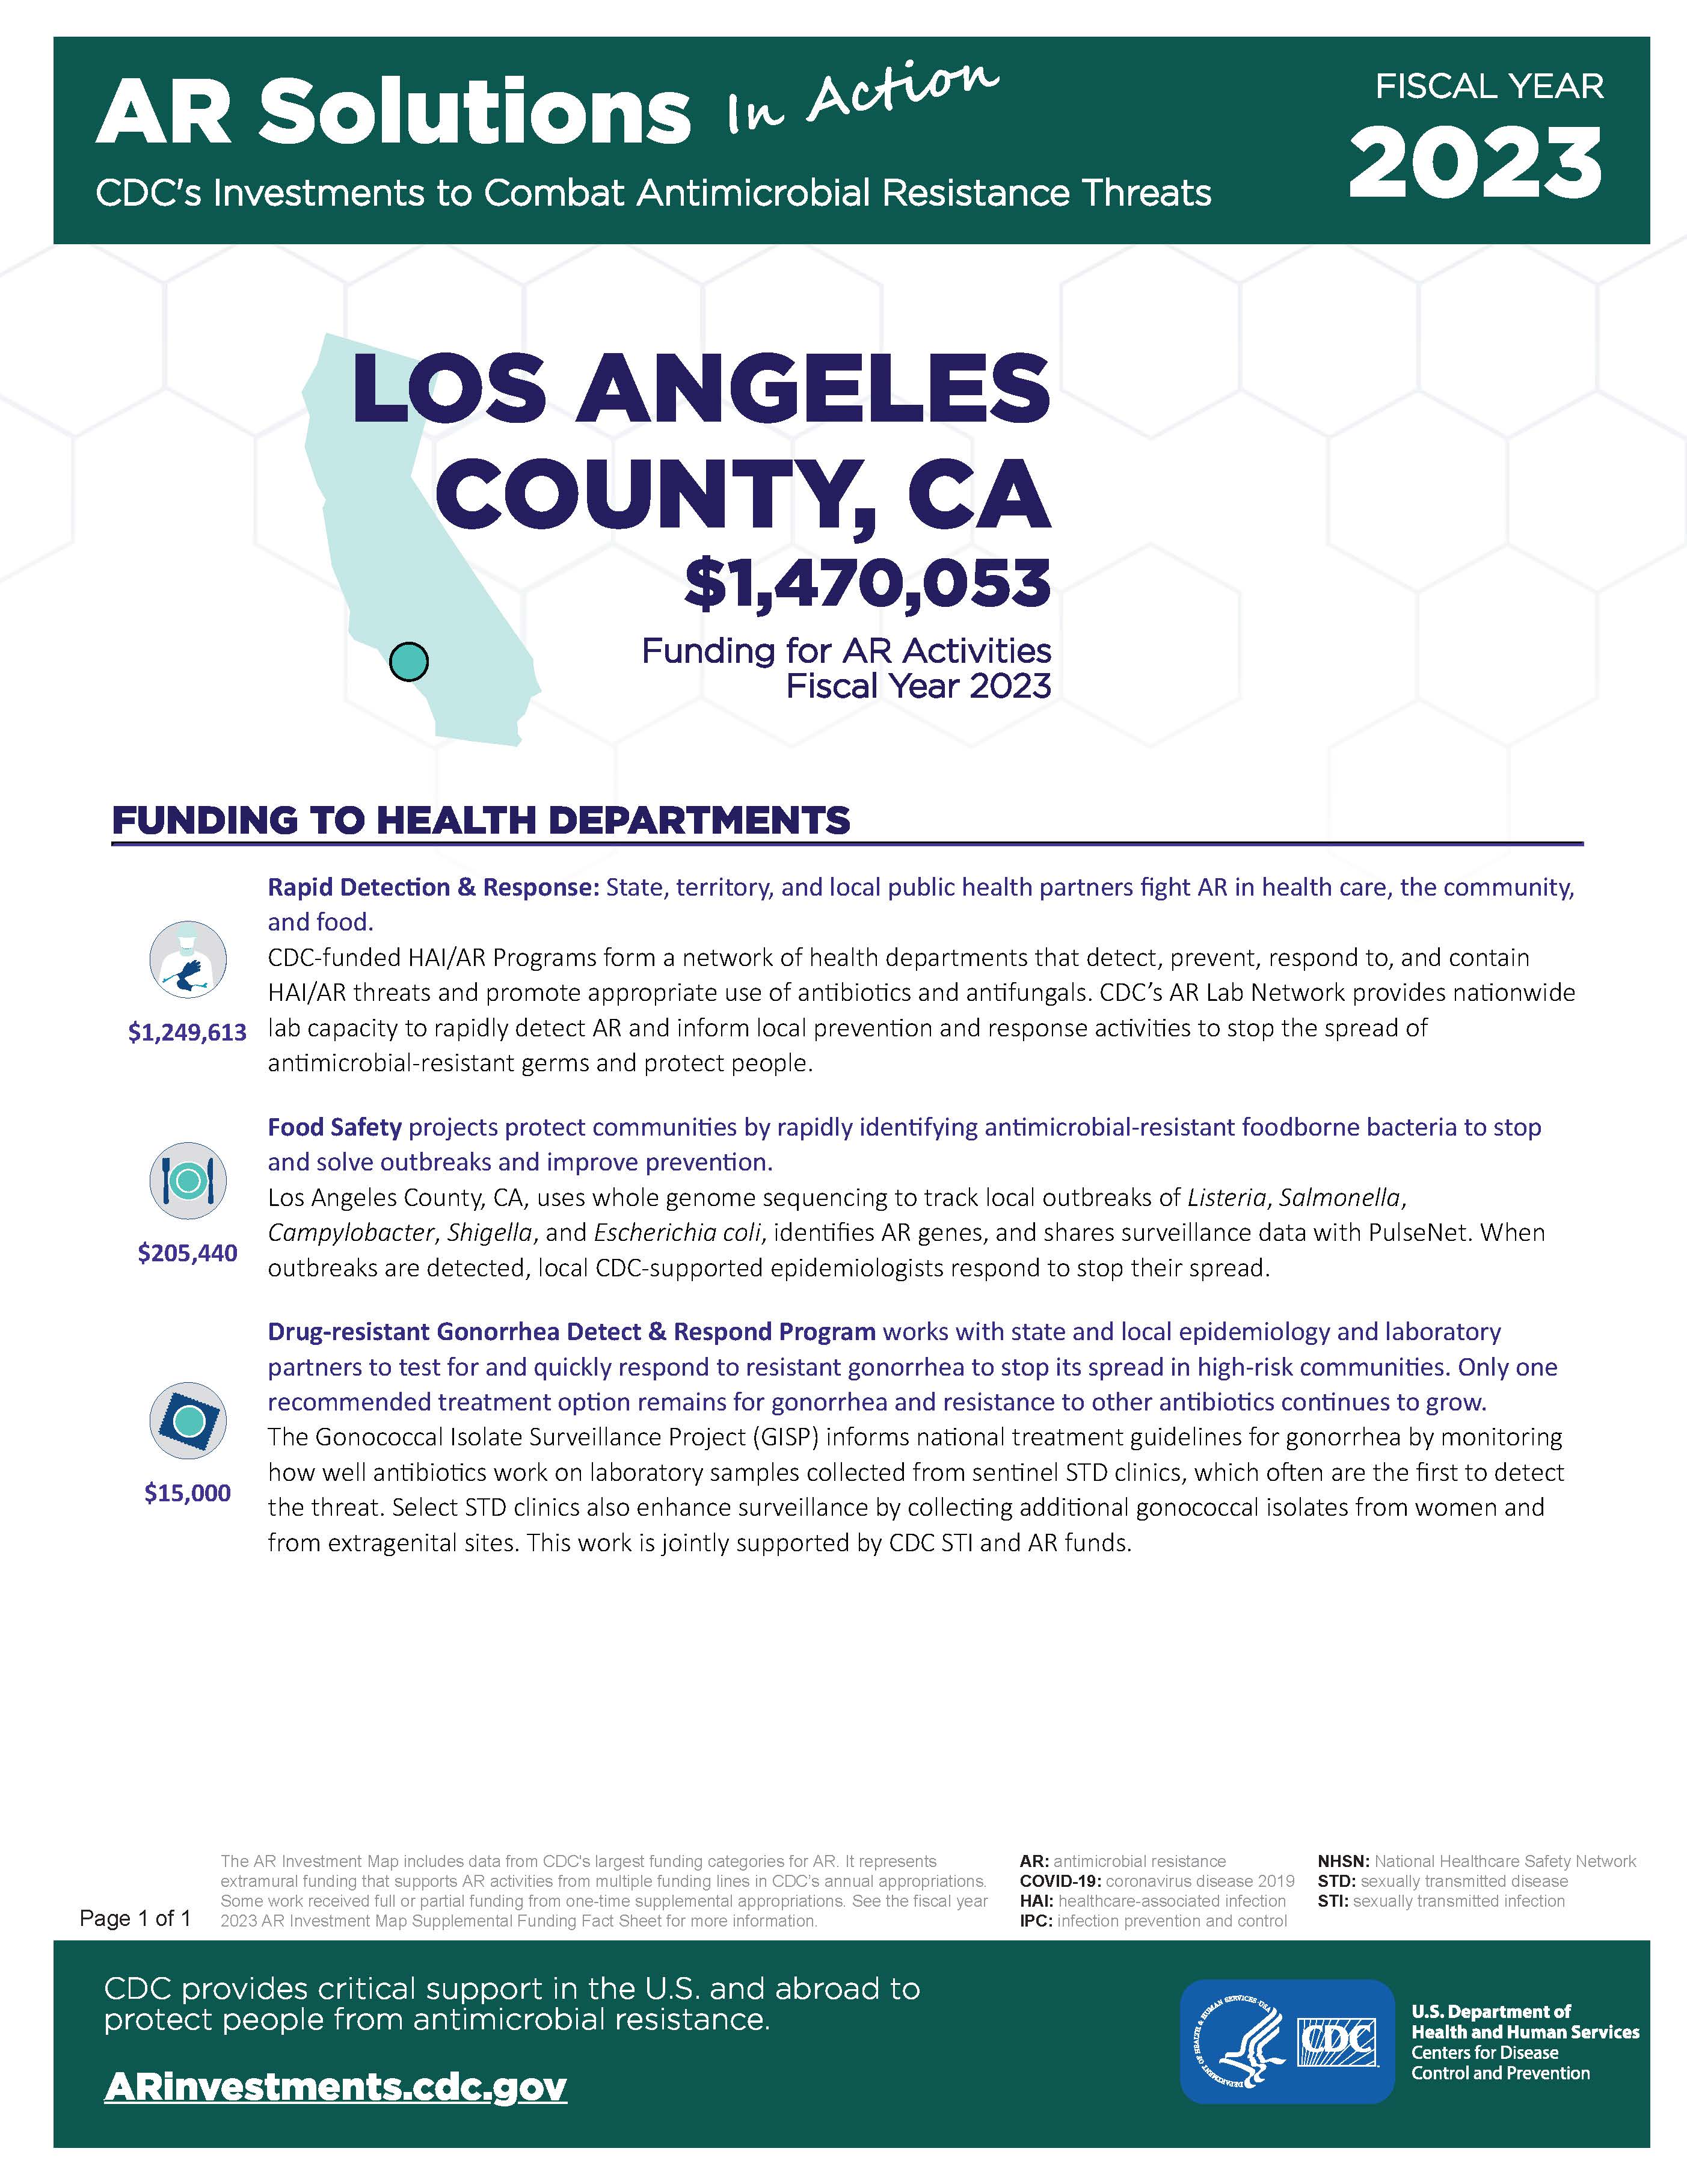 View Factsheet for Los Angeles County, CA